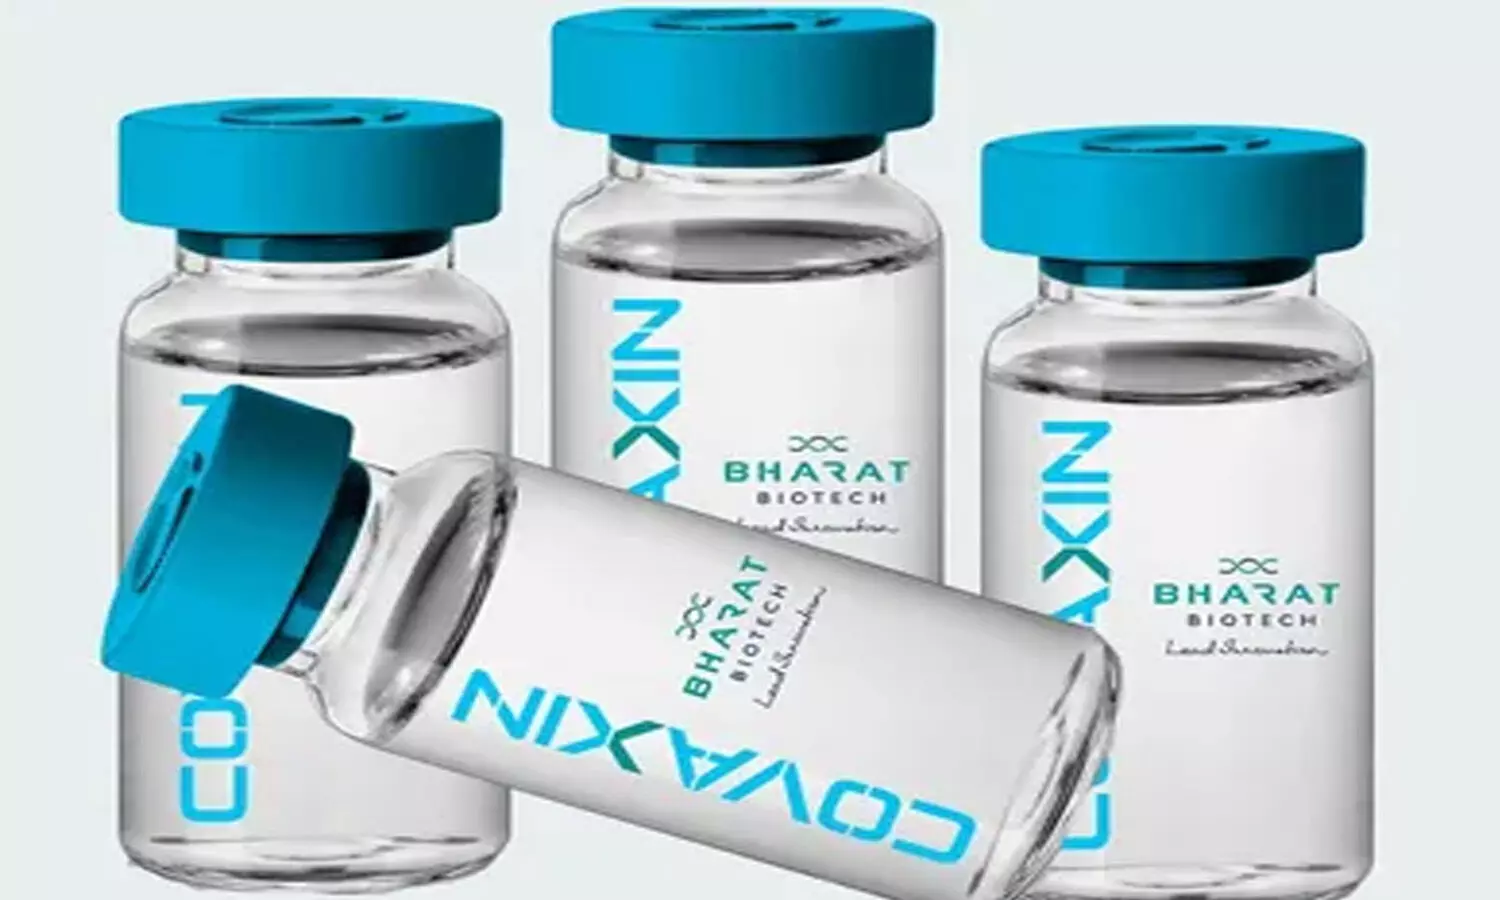 Bharat Biotech Covaxin set for trials on Kids aged between 2 to 18 years